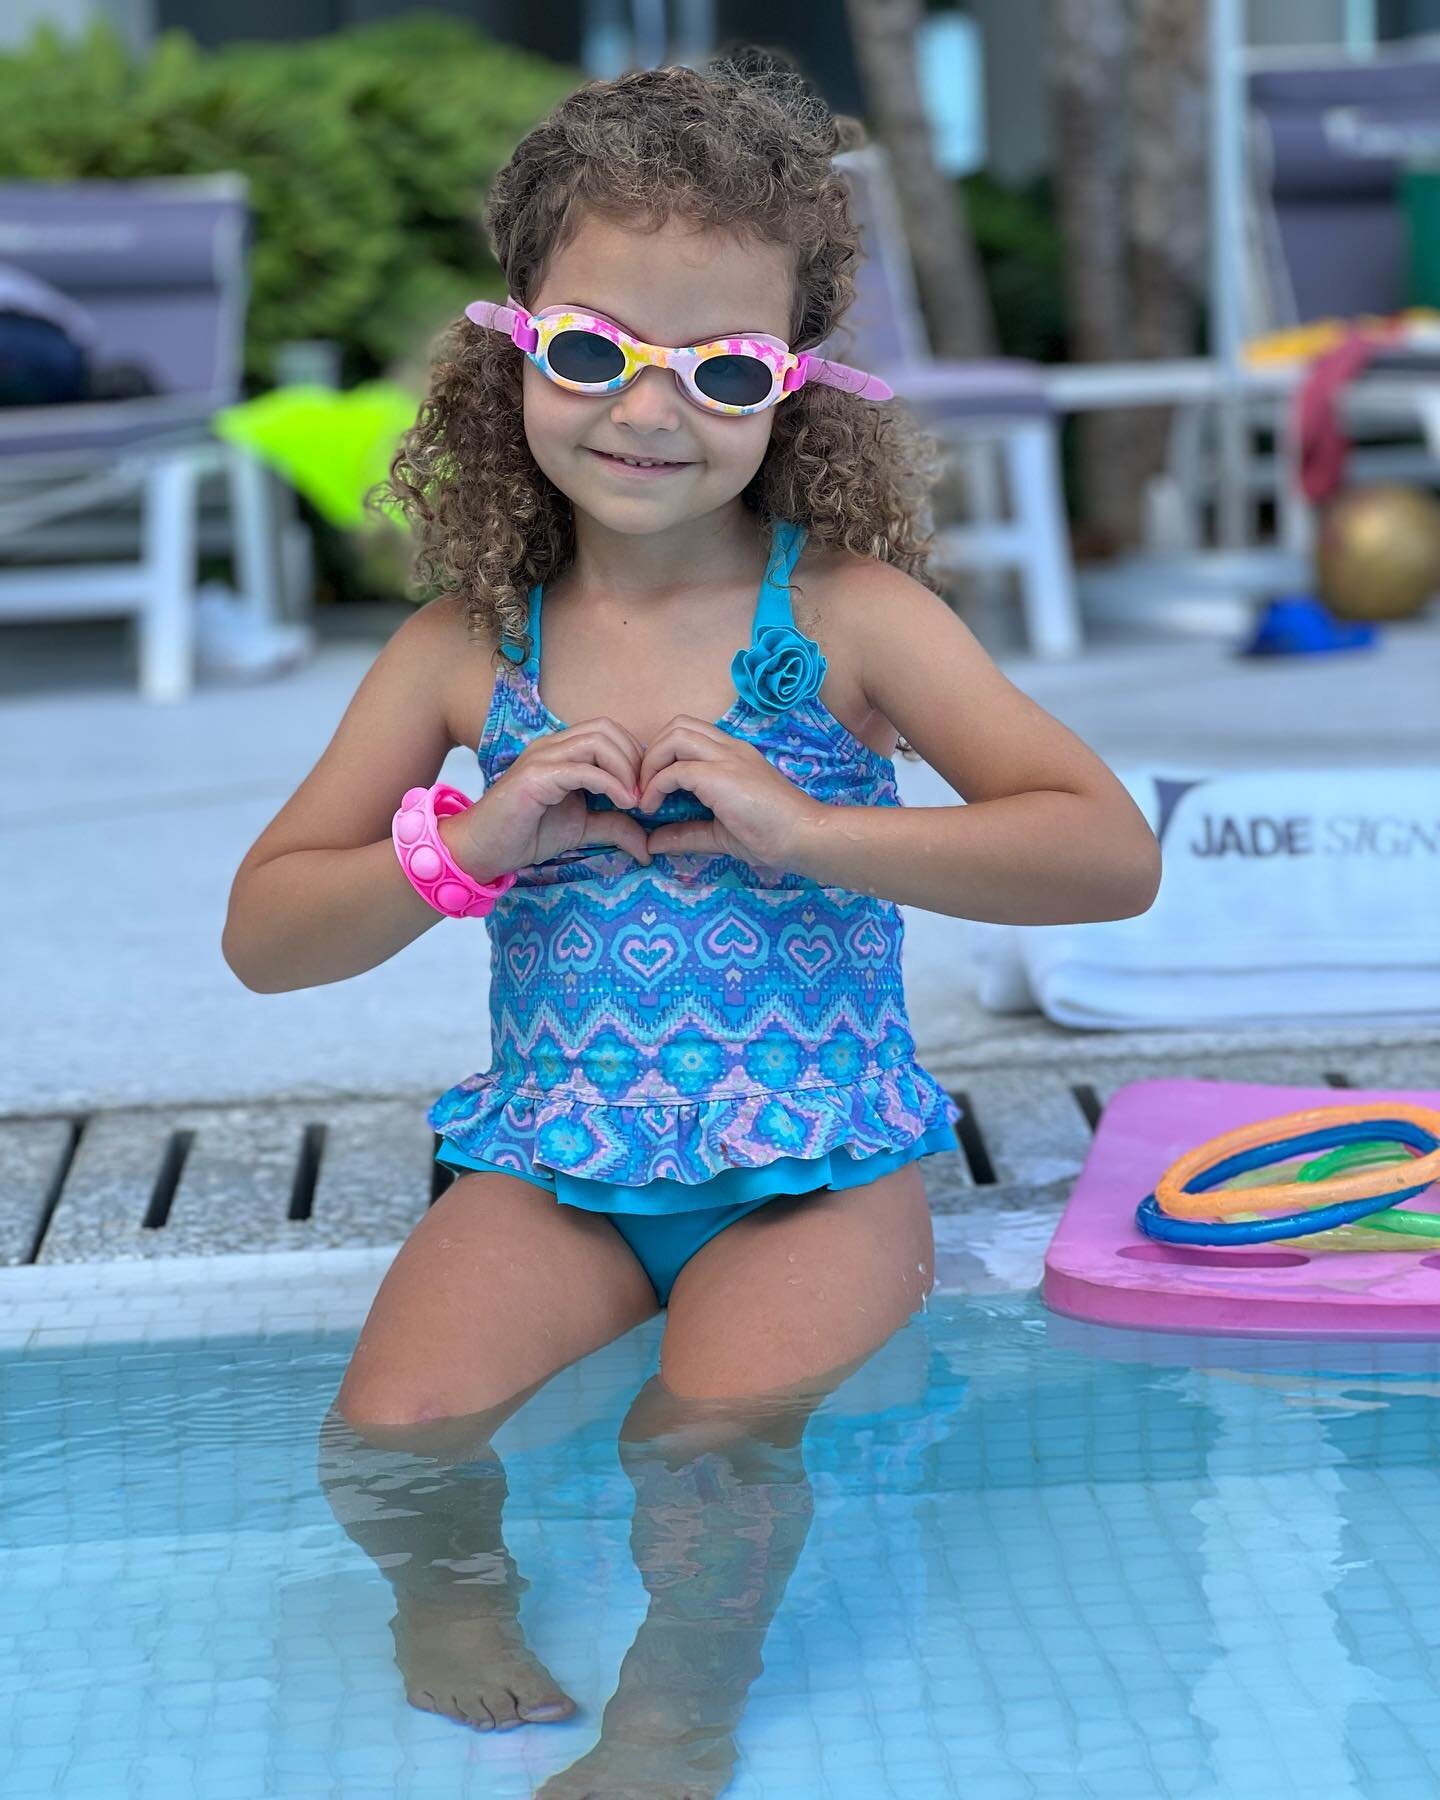 Nothing but 🫶🏻 before swim lesson starts 🧜🏼&zwj;♀️
.
.
.
.
.
#swimhaven #drowningprevention #pool #poolparty #babyswimming #florida #miami #sunnyislesbeach #swim #swimlessons #americanredcross